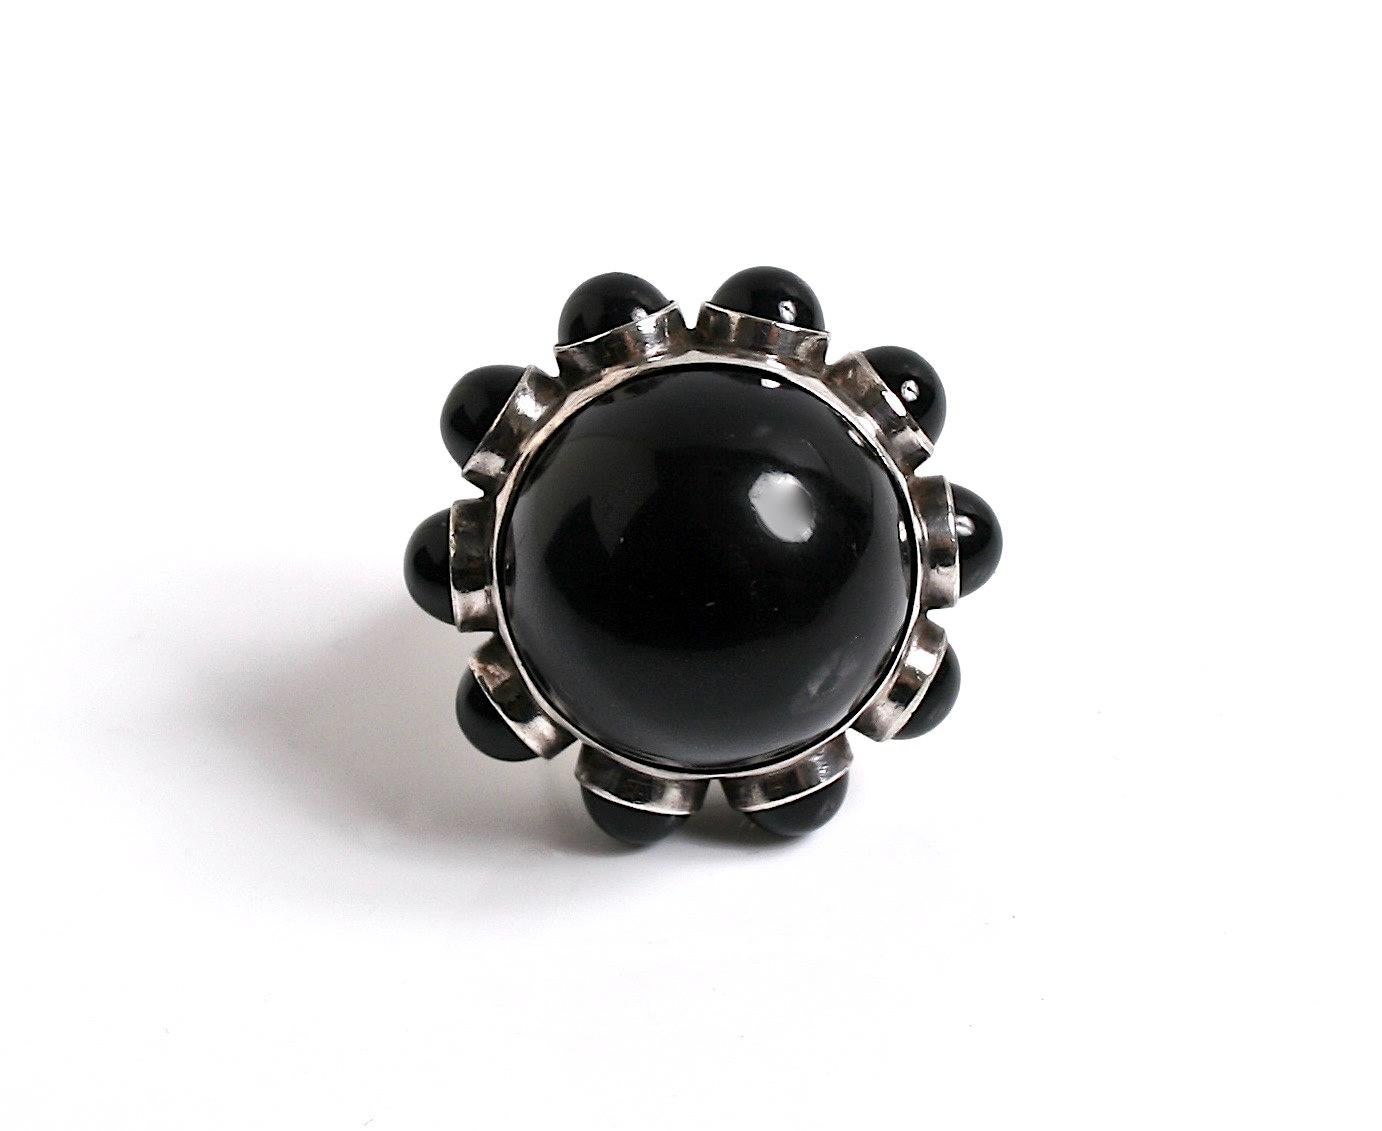 Rare vintage Georg Jensen sterling silver & black onyx ring designed by Astrid Fog Denmark c.1970 
Design number 166 comes in the original Georg Jensen box
The Onyx stones are perfect one large central stone with 10 smaller stones
Size K
